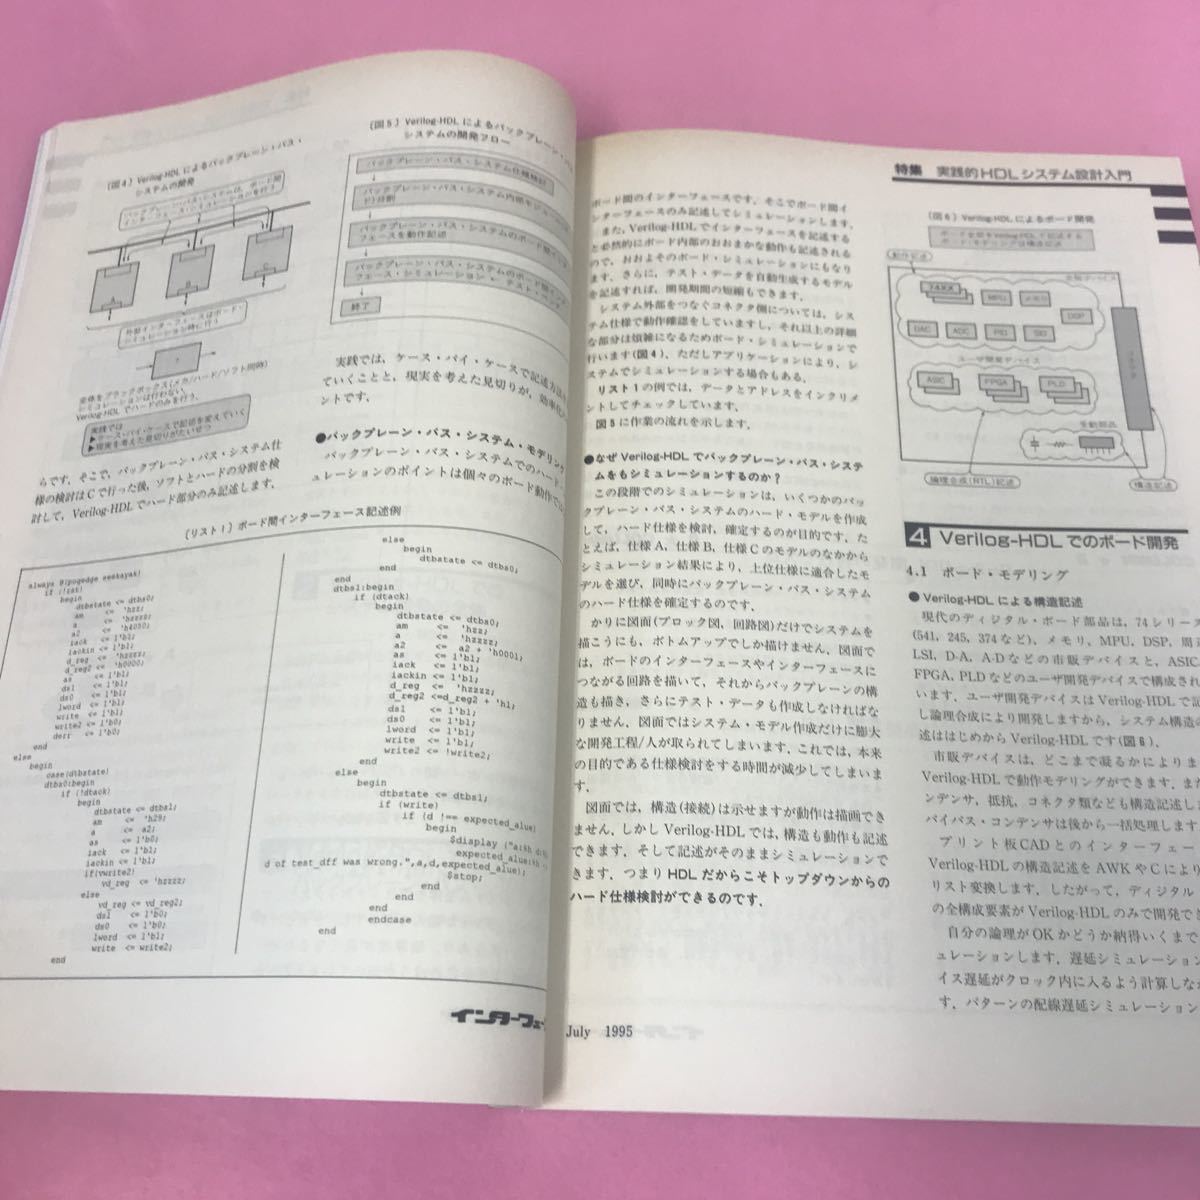 A04-080 interface 1995 year 7 month number practice .HDL system design introduction FA for network construction. thought person 